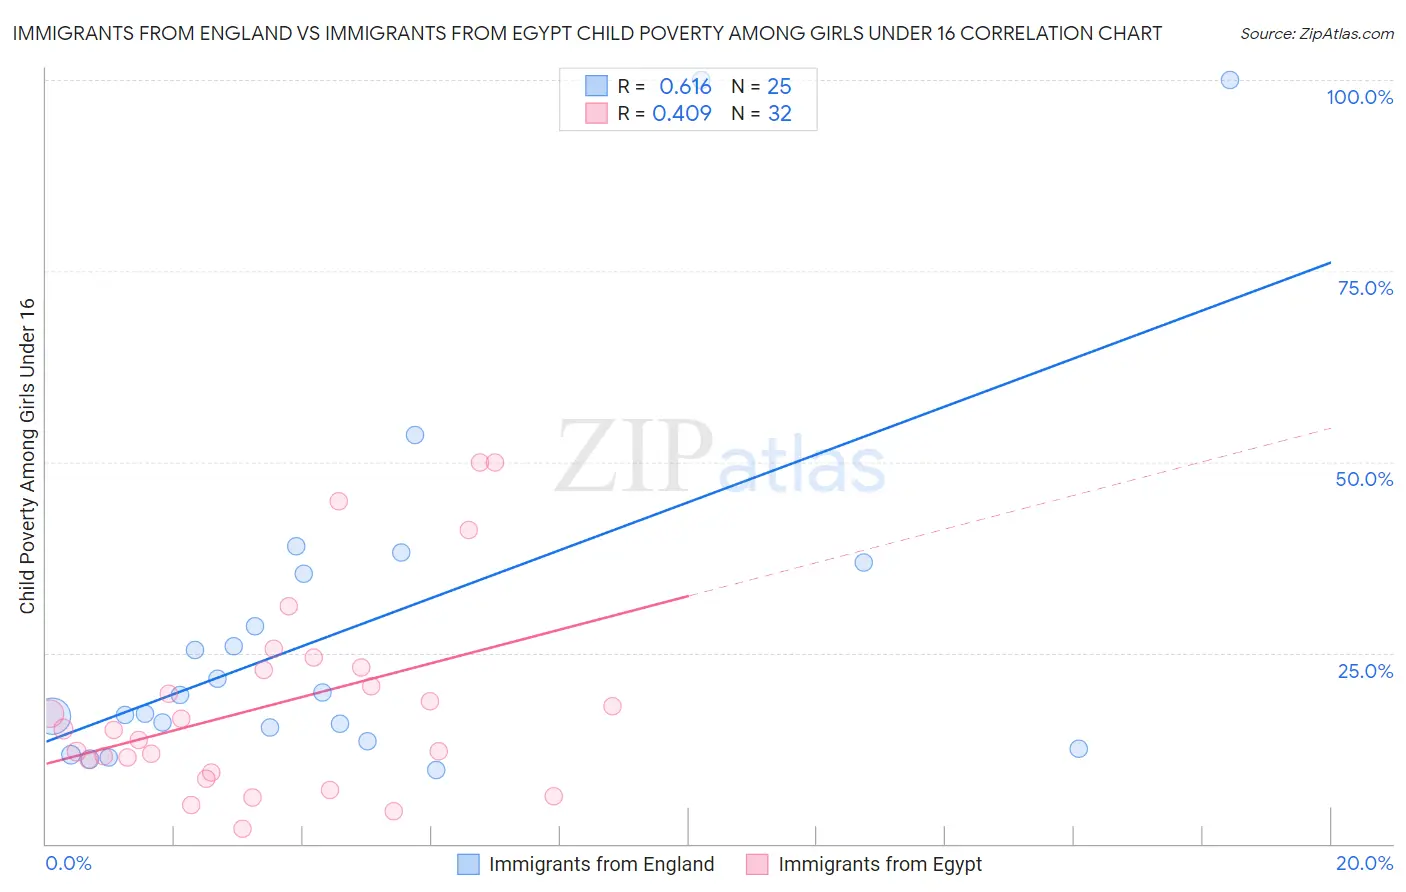 Immigrants from England vs Immigrants from Egypt Child Poverty Among Girls Under 16